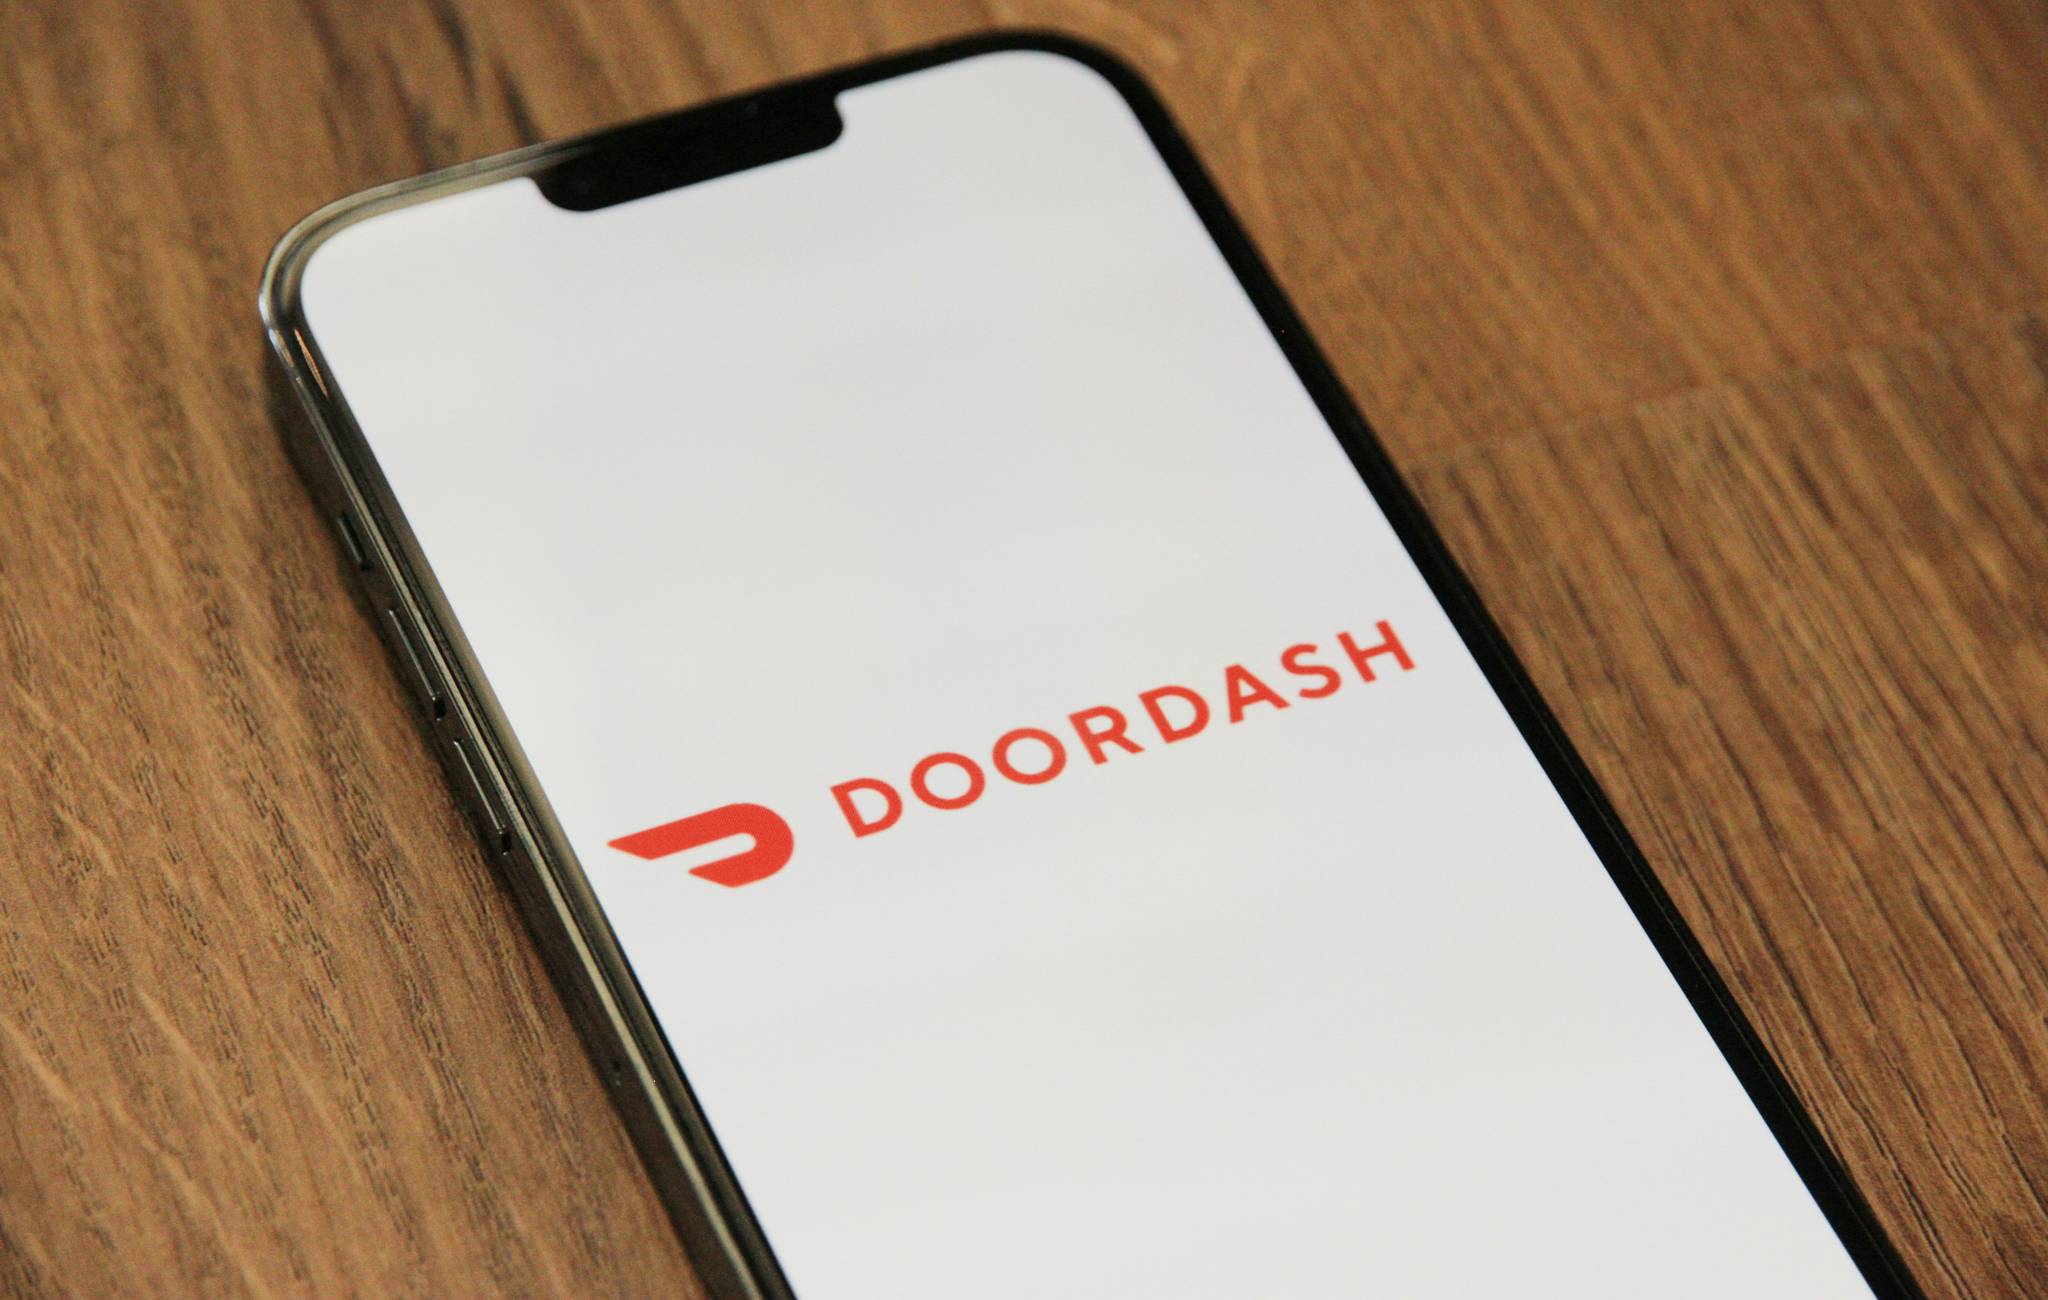 DoorDash and Ulta Beauty cater to social shoppers